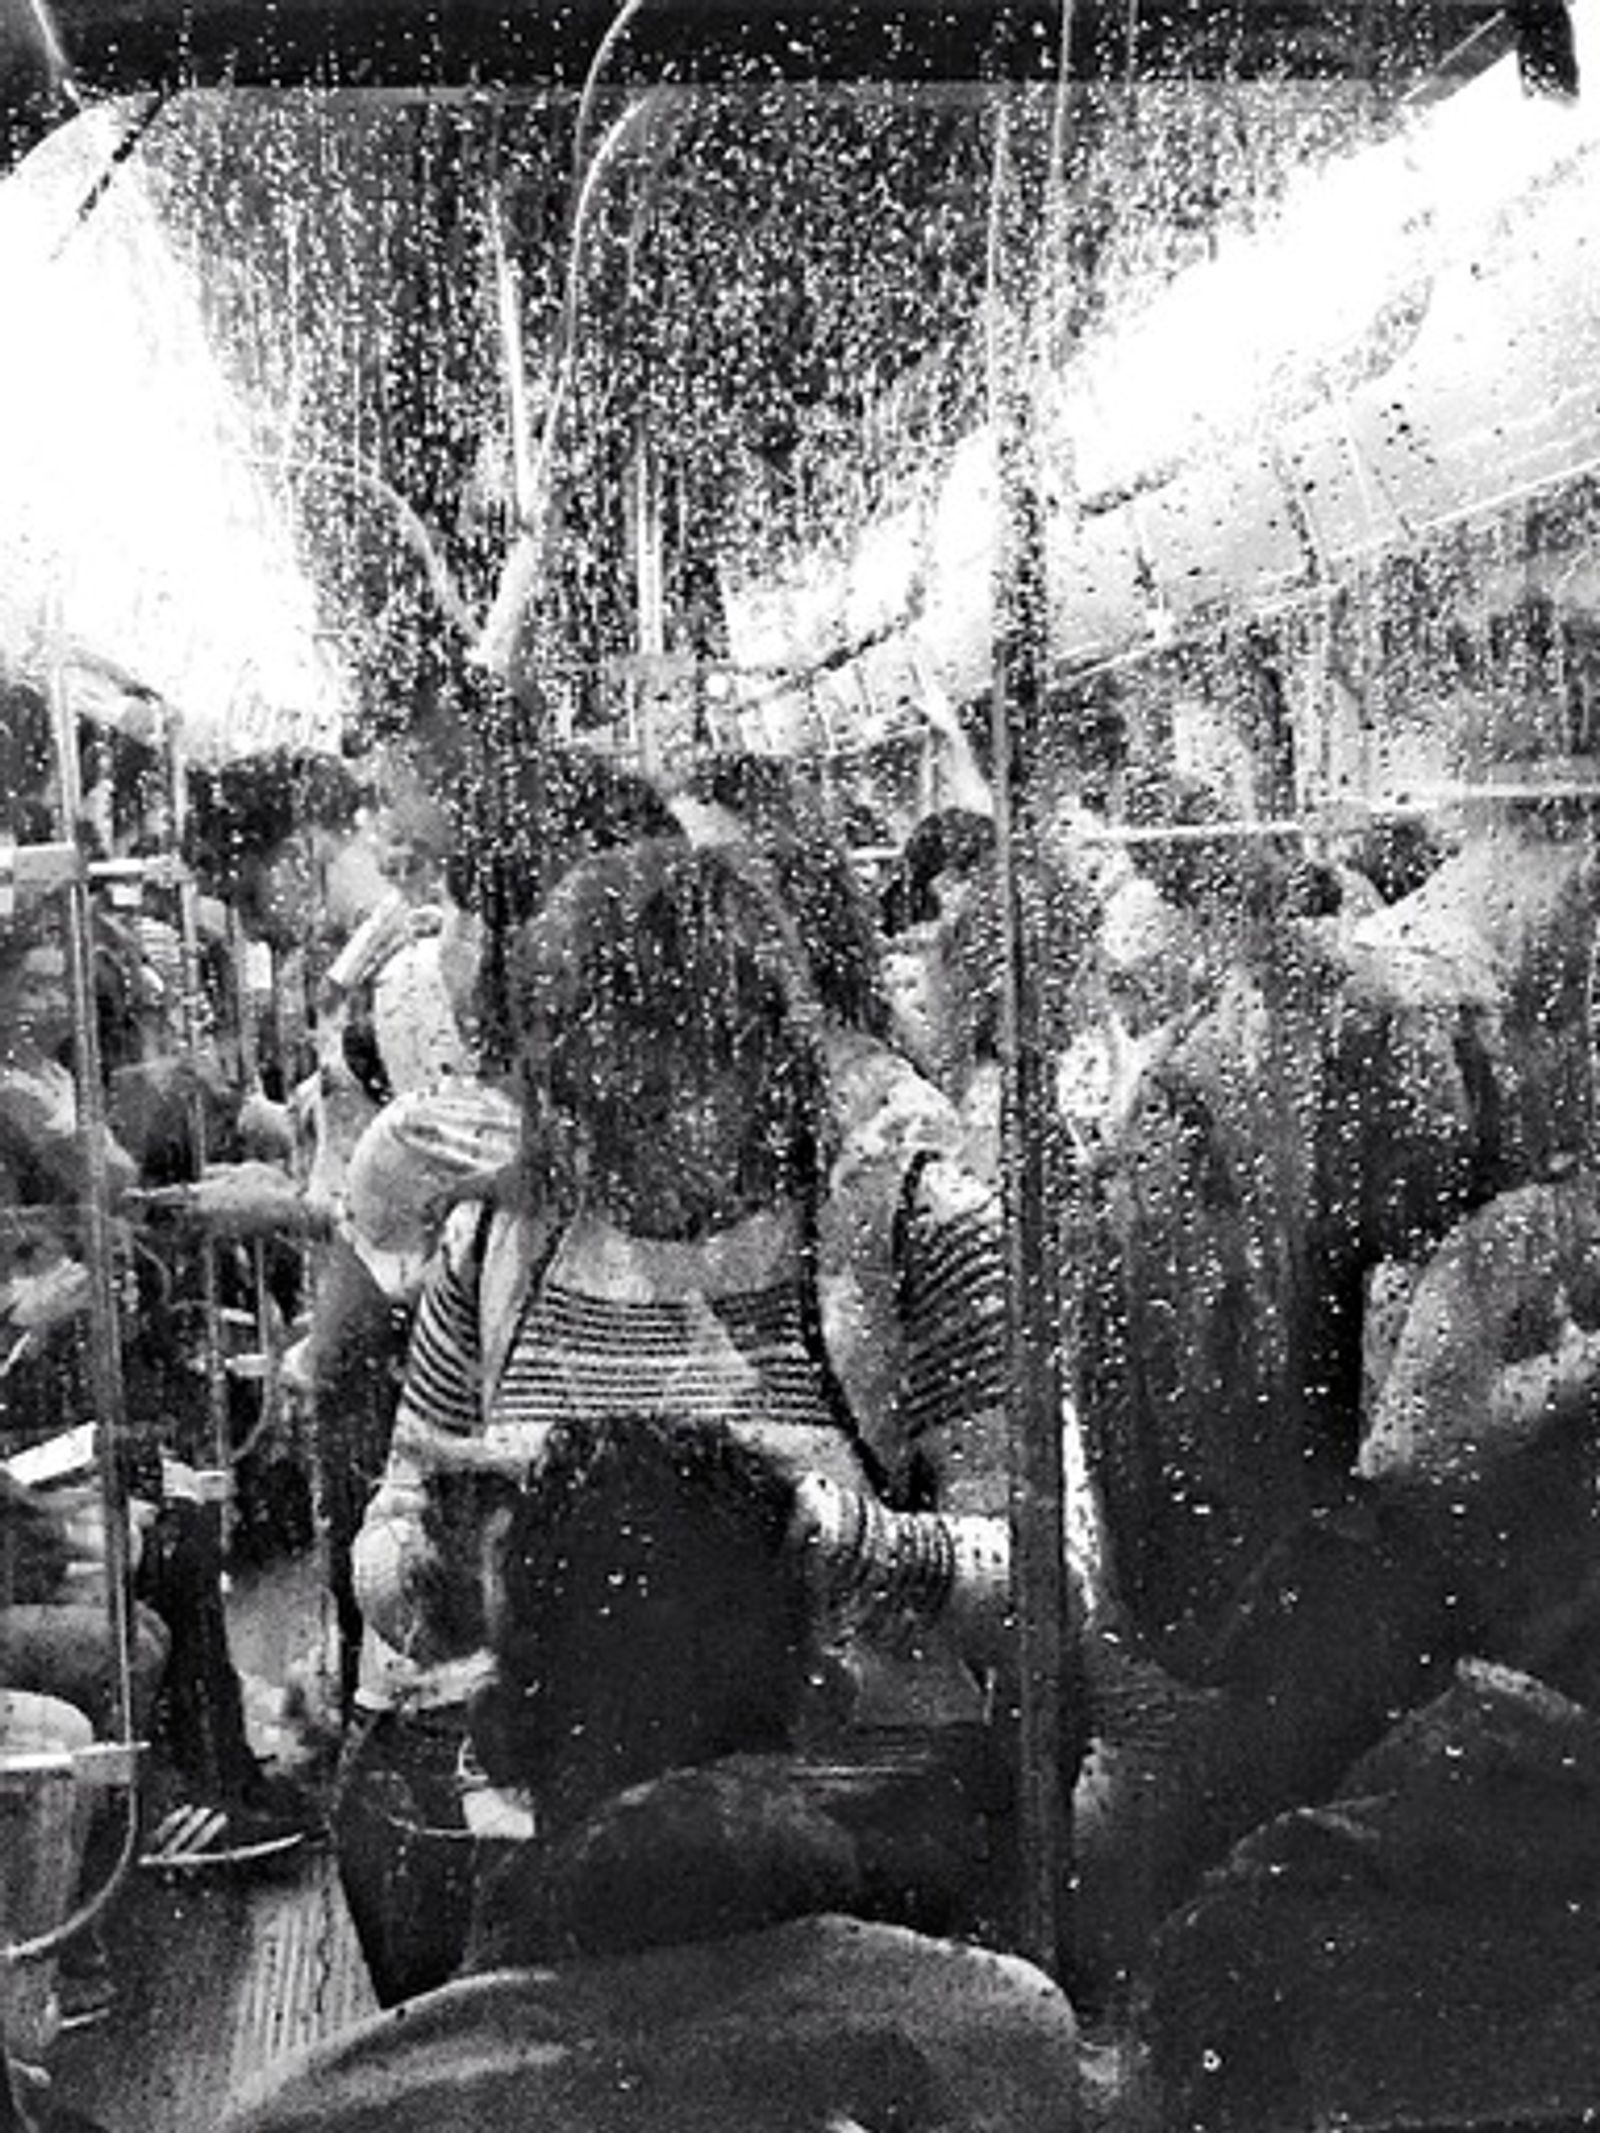 © Camila Giraldo - Image from the Metro stories photography project